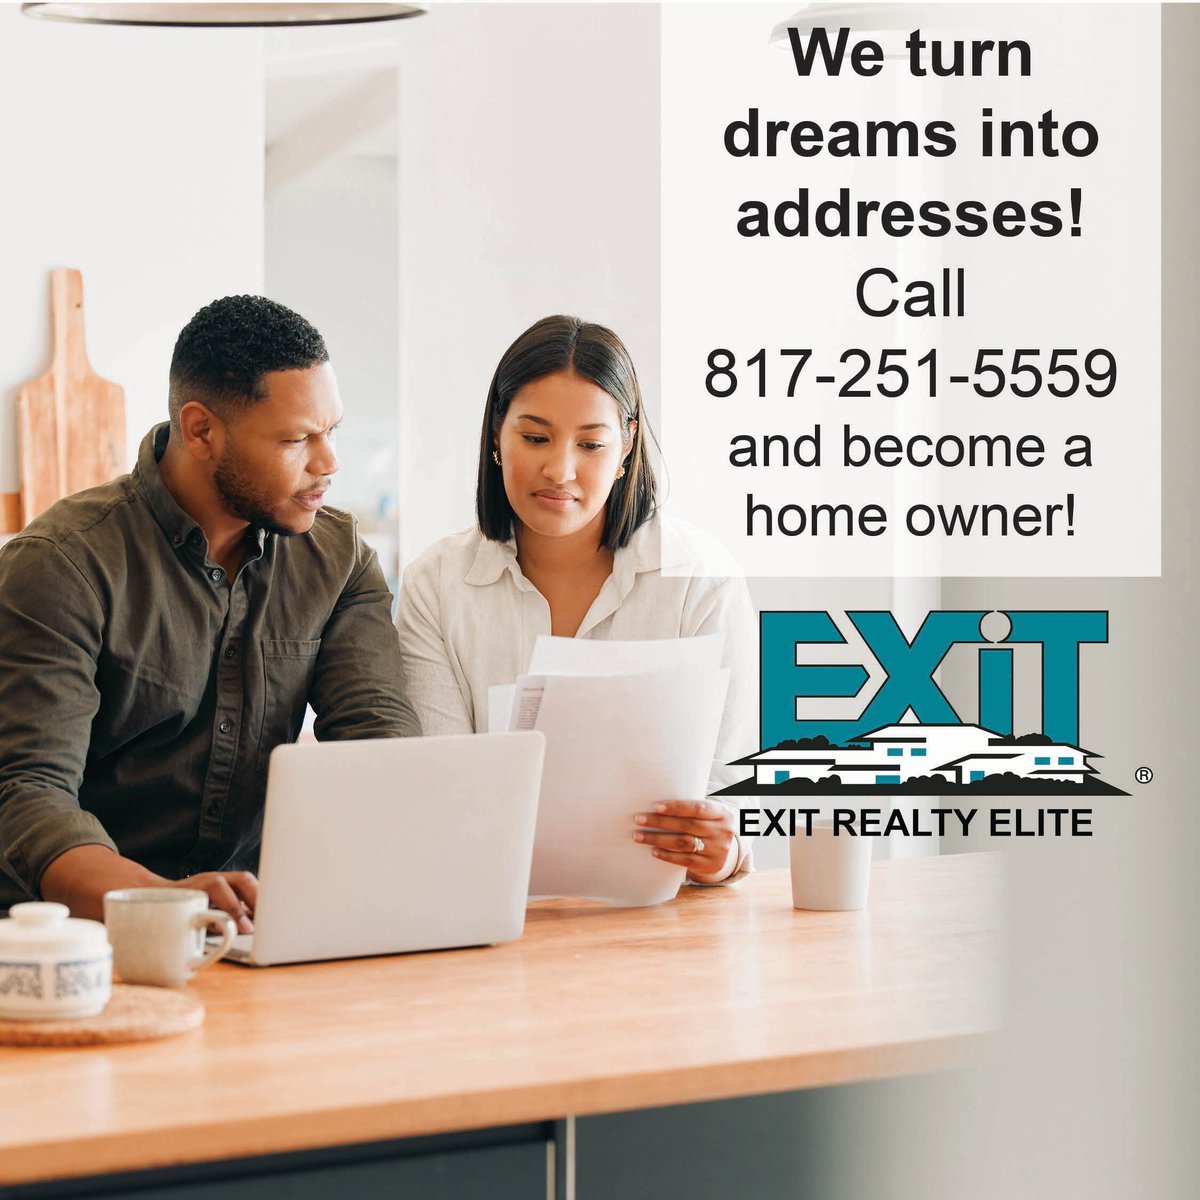 We turn dreams into addresses!
Call us today and become a home owner.

#LOVEXIT #ImSold #ThinkSmartThinkEXIT #RealEstateReinvented #ListwithEXIT #DFWMetroplex #buyahome #sellahome #EXITRealtyElite #RealEstateCareers #TexasRealEstate